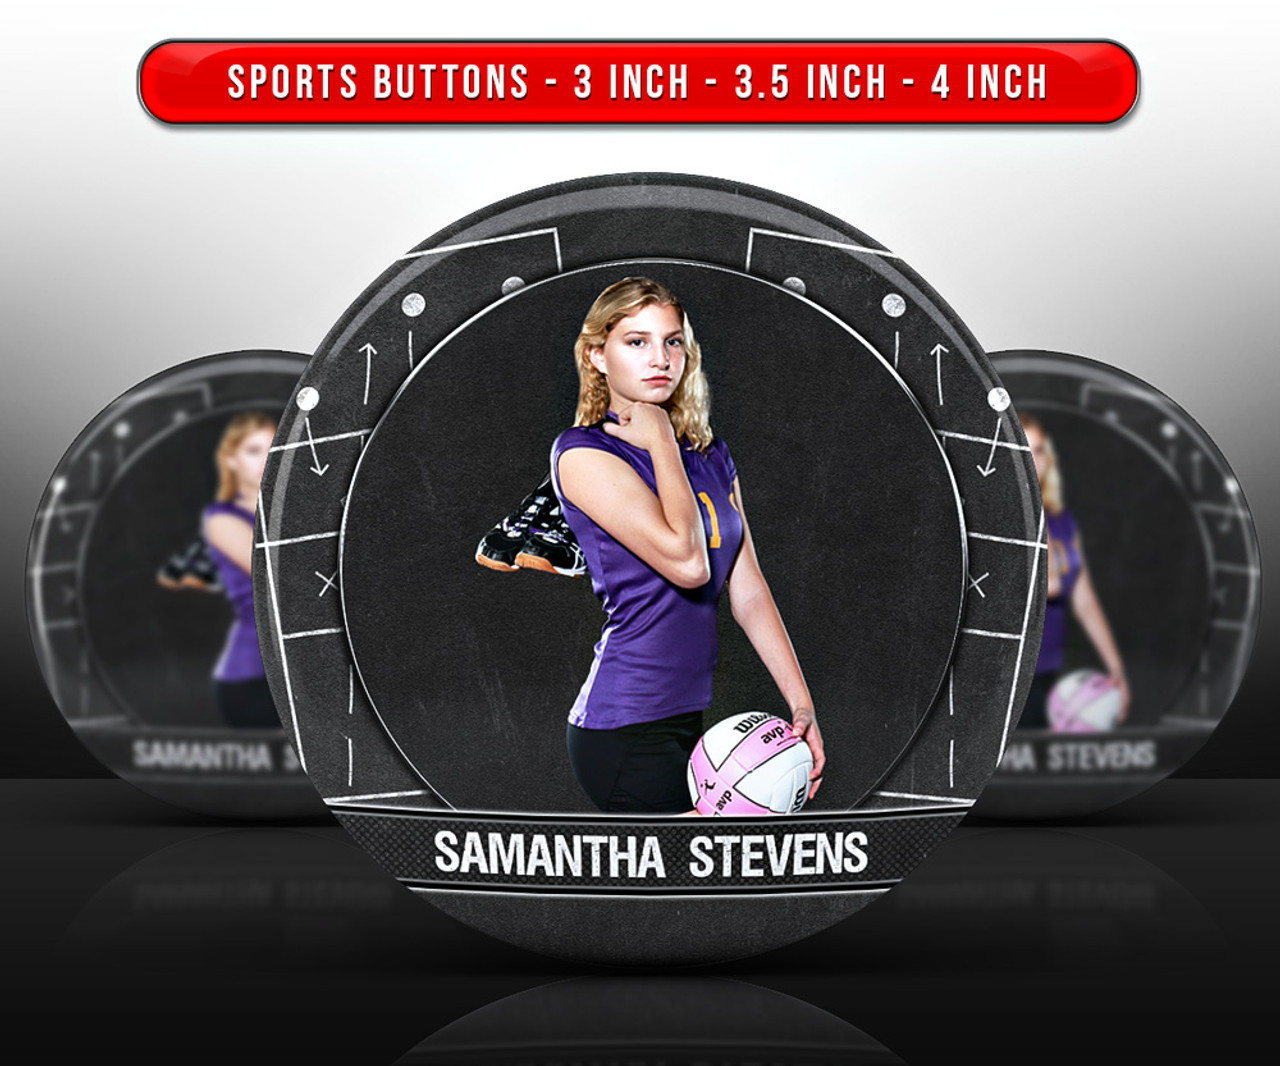 SPORTS PHOTO BUTTON TEMPLATES - VOLLEYBALL CHALK